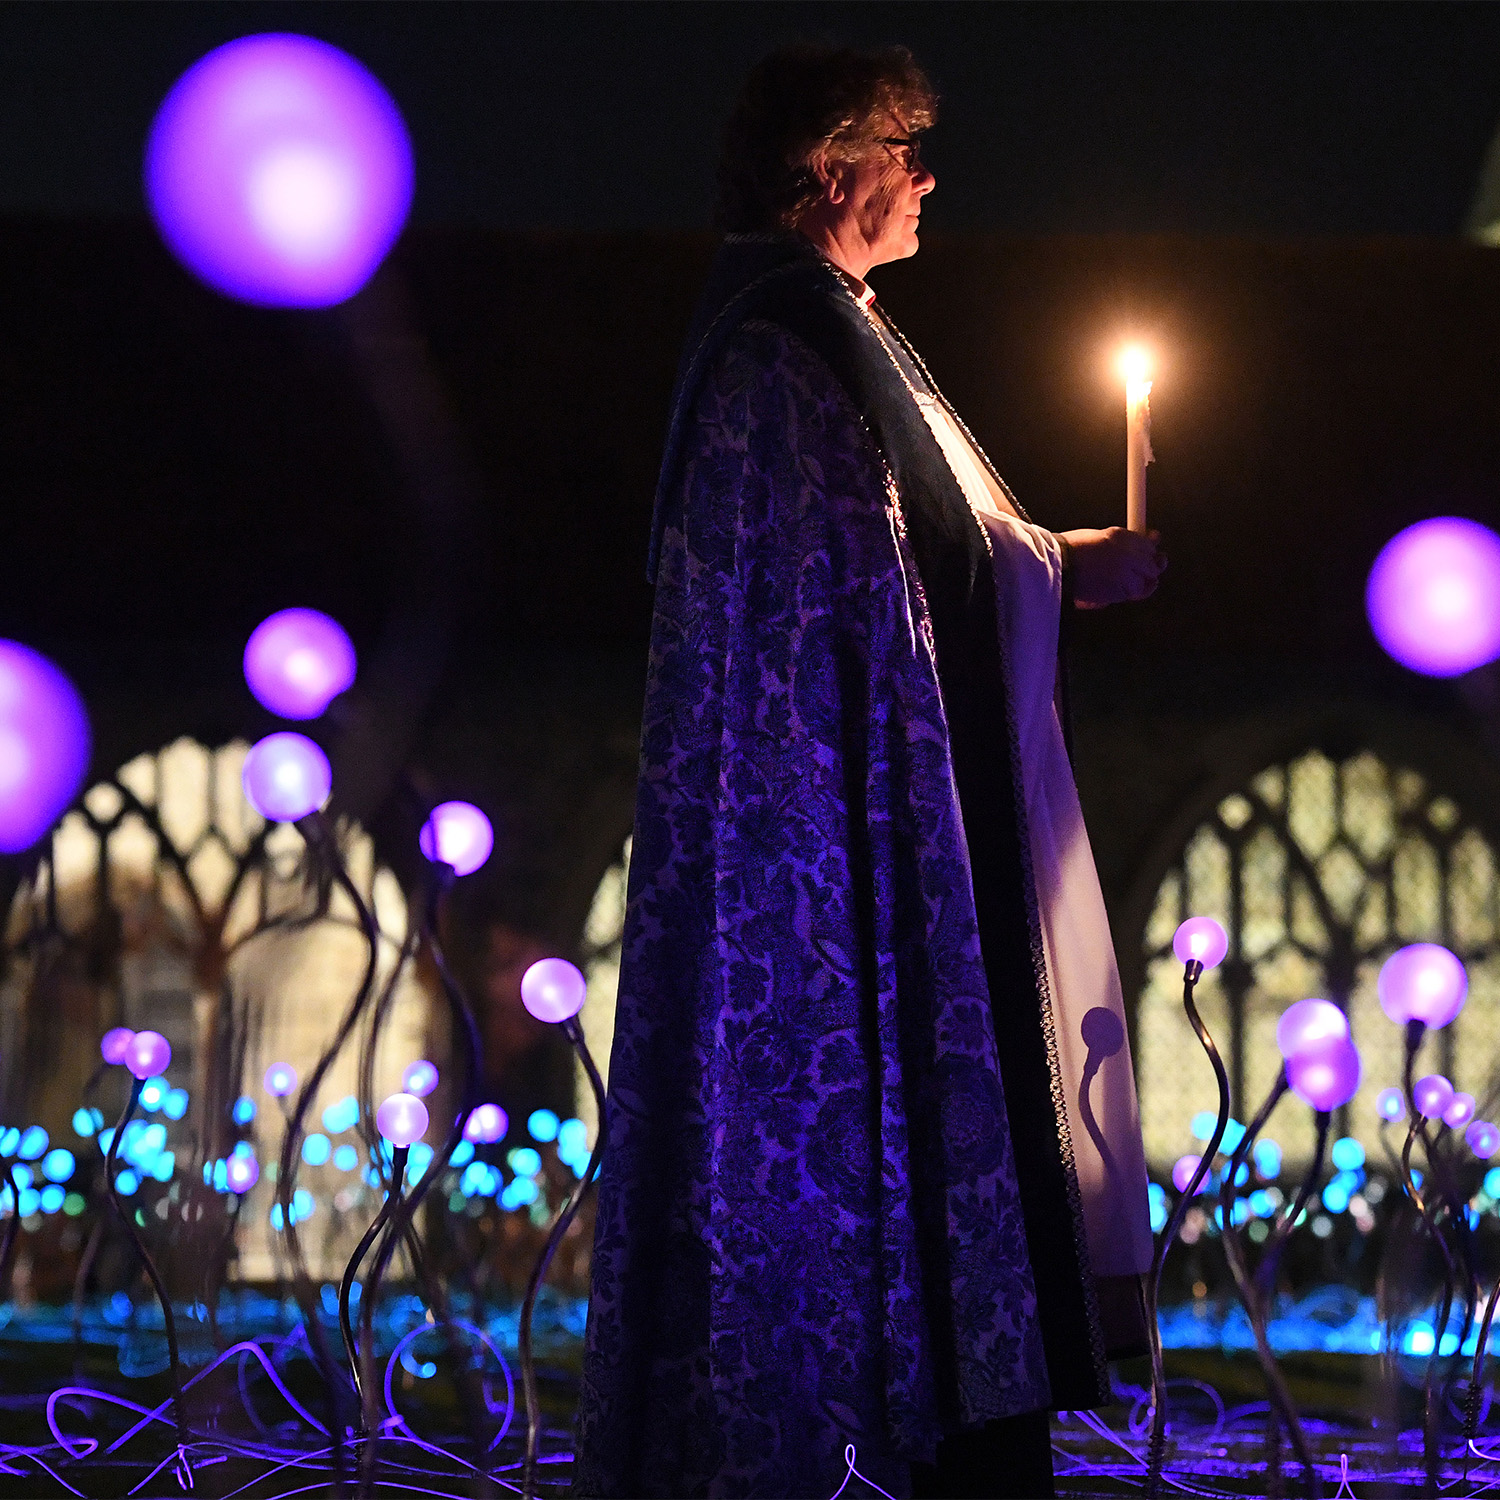 The Dean of Chichester stands in Bruce Munro's Field of Light